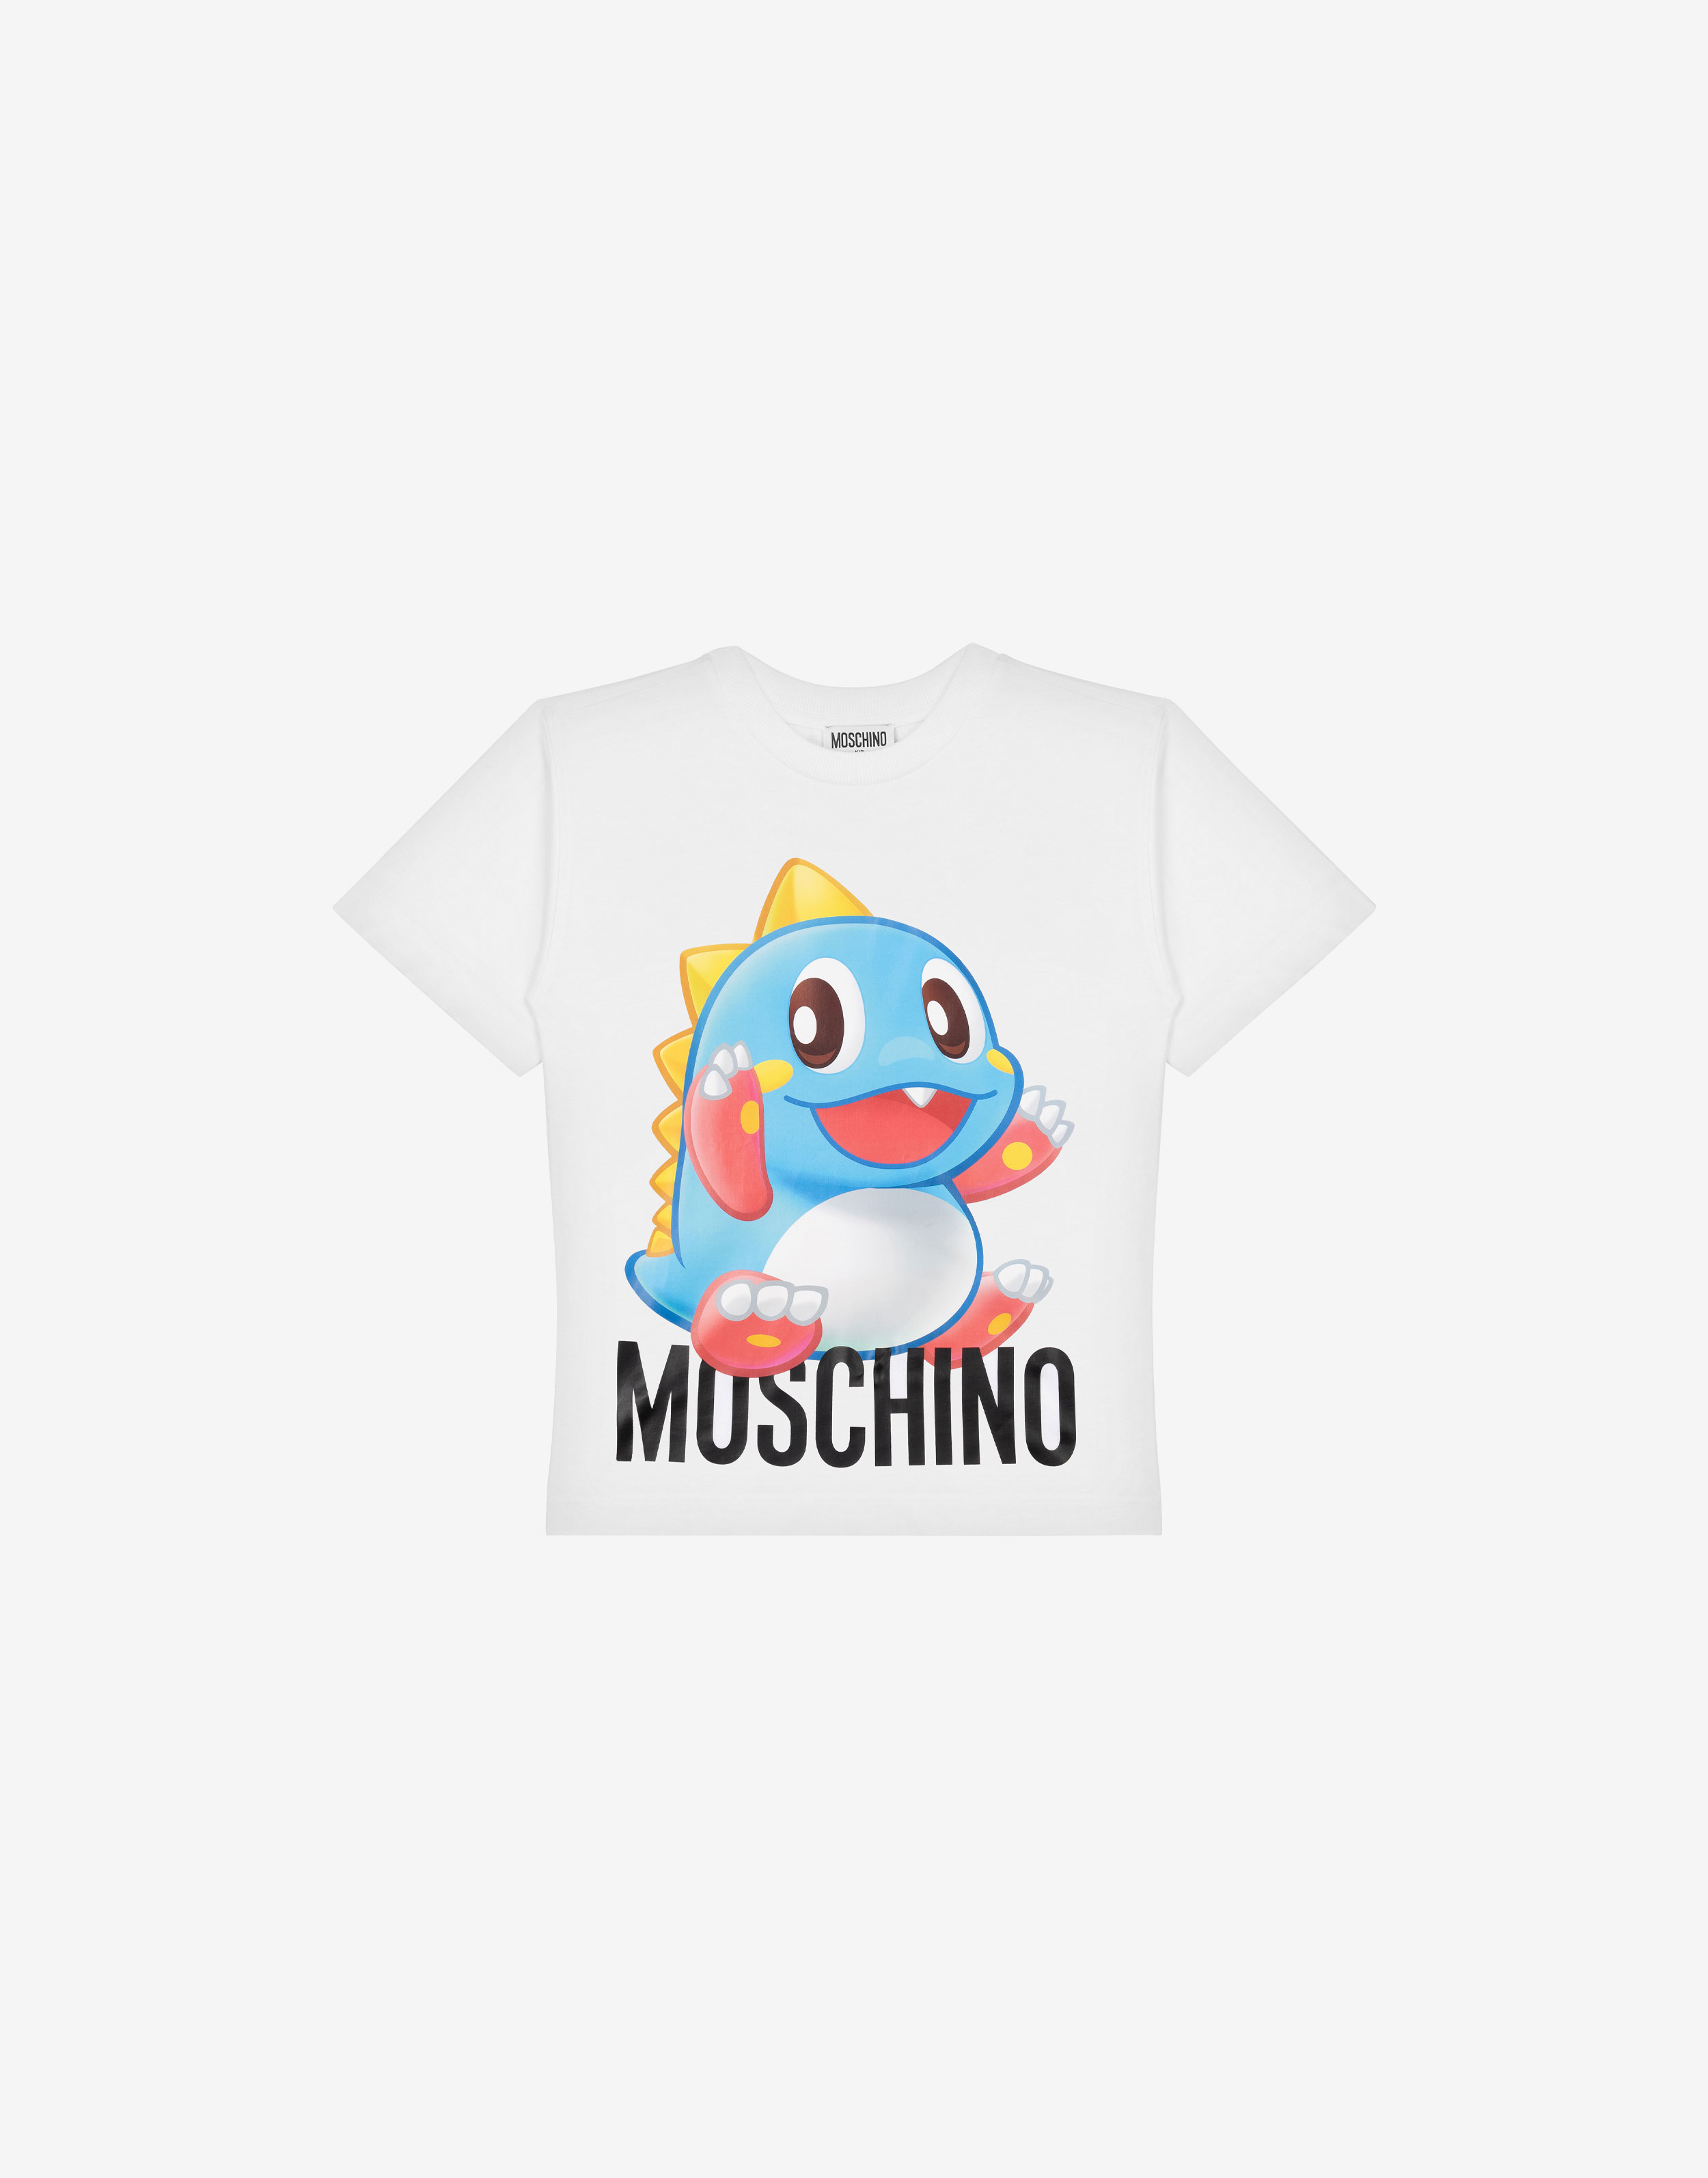 Moschino Shirts for Men - Official Store